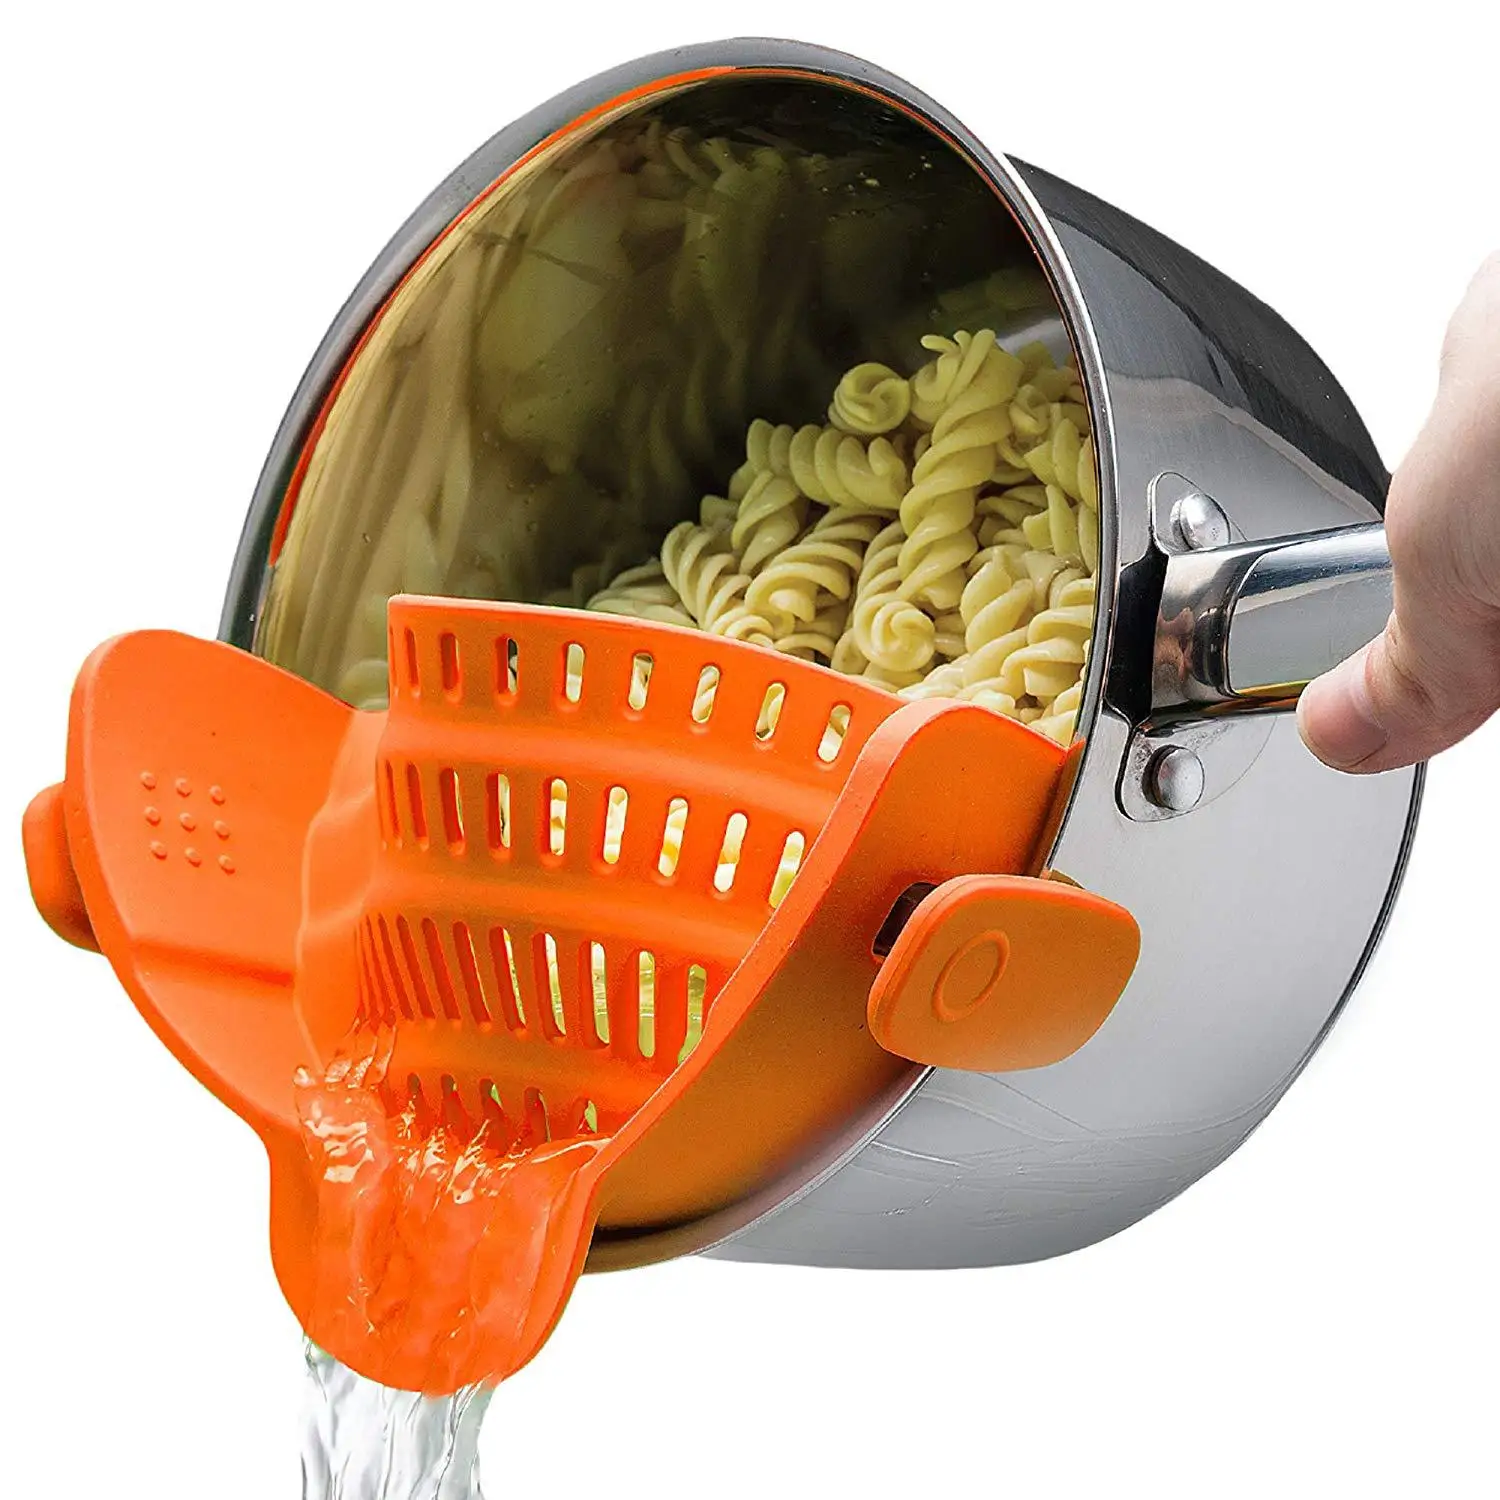 

Silicone Kitchen Strainer Clip Pan Drain Rack Bowl Funnel Rice Noodles Vegetable Washing Colander Draining Excess Liquid Univers